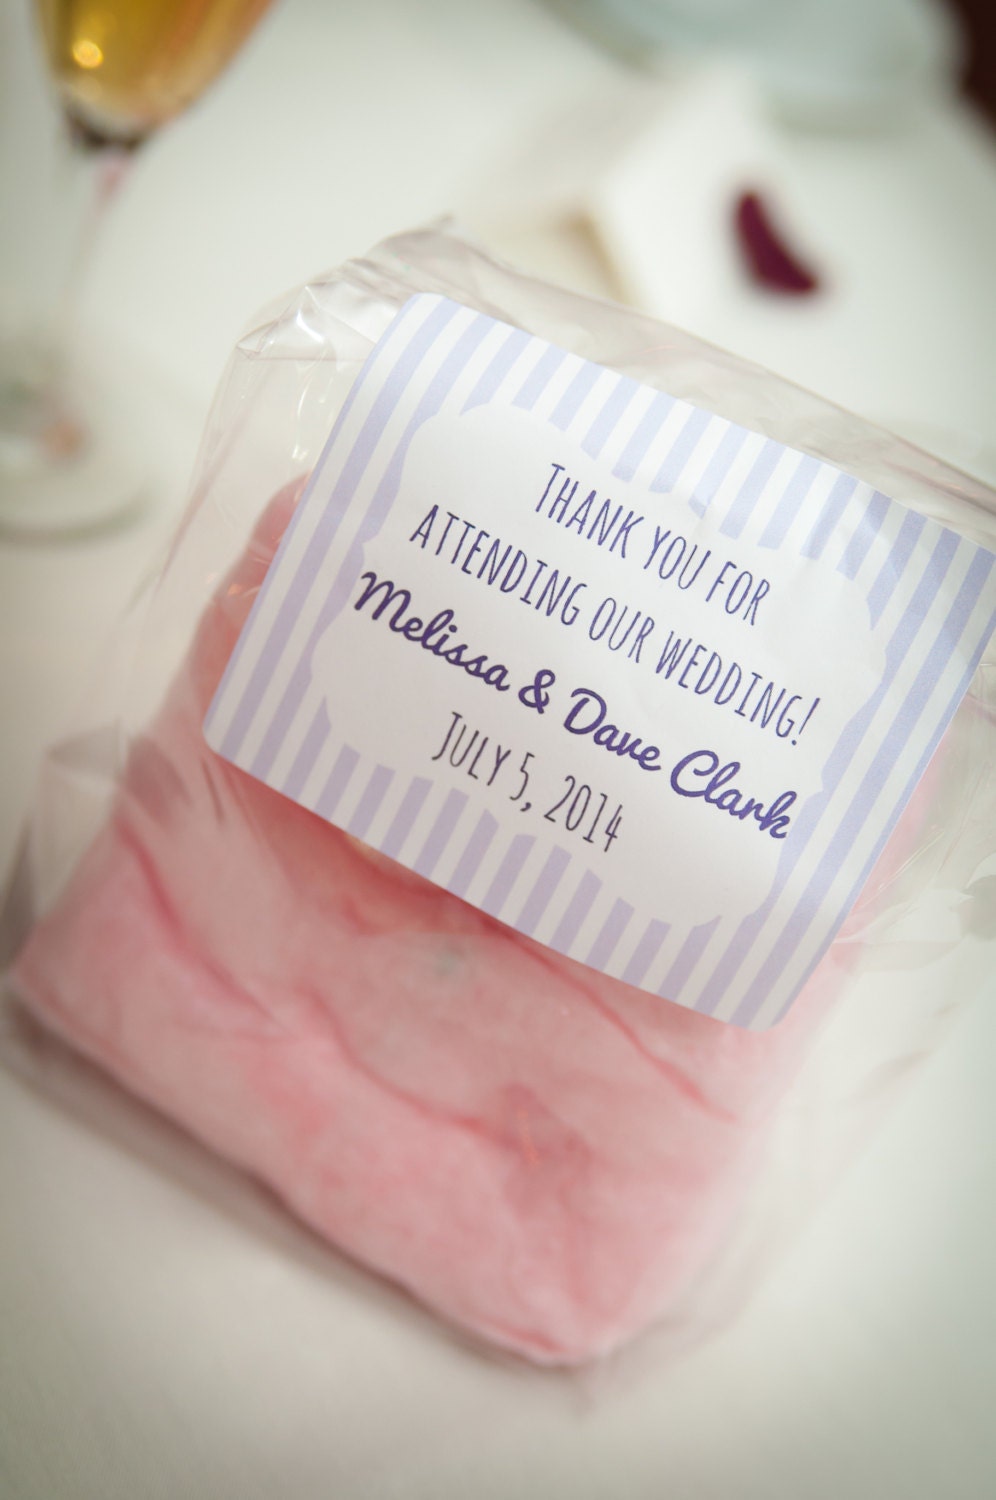 Cotton Candy Party Favors With Custom By Sweetopiacottoncandy